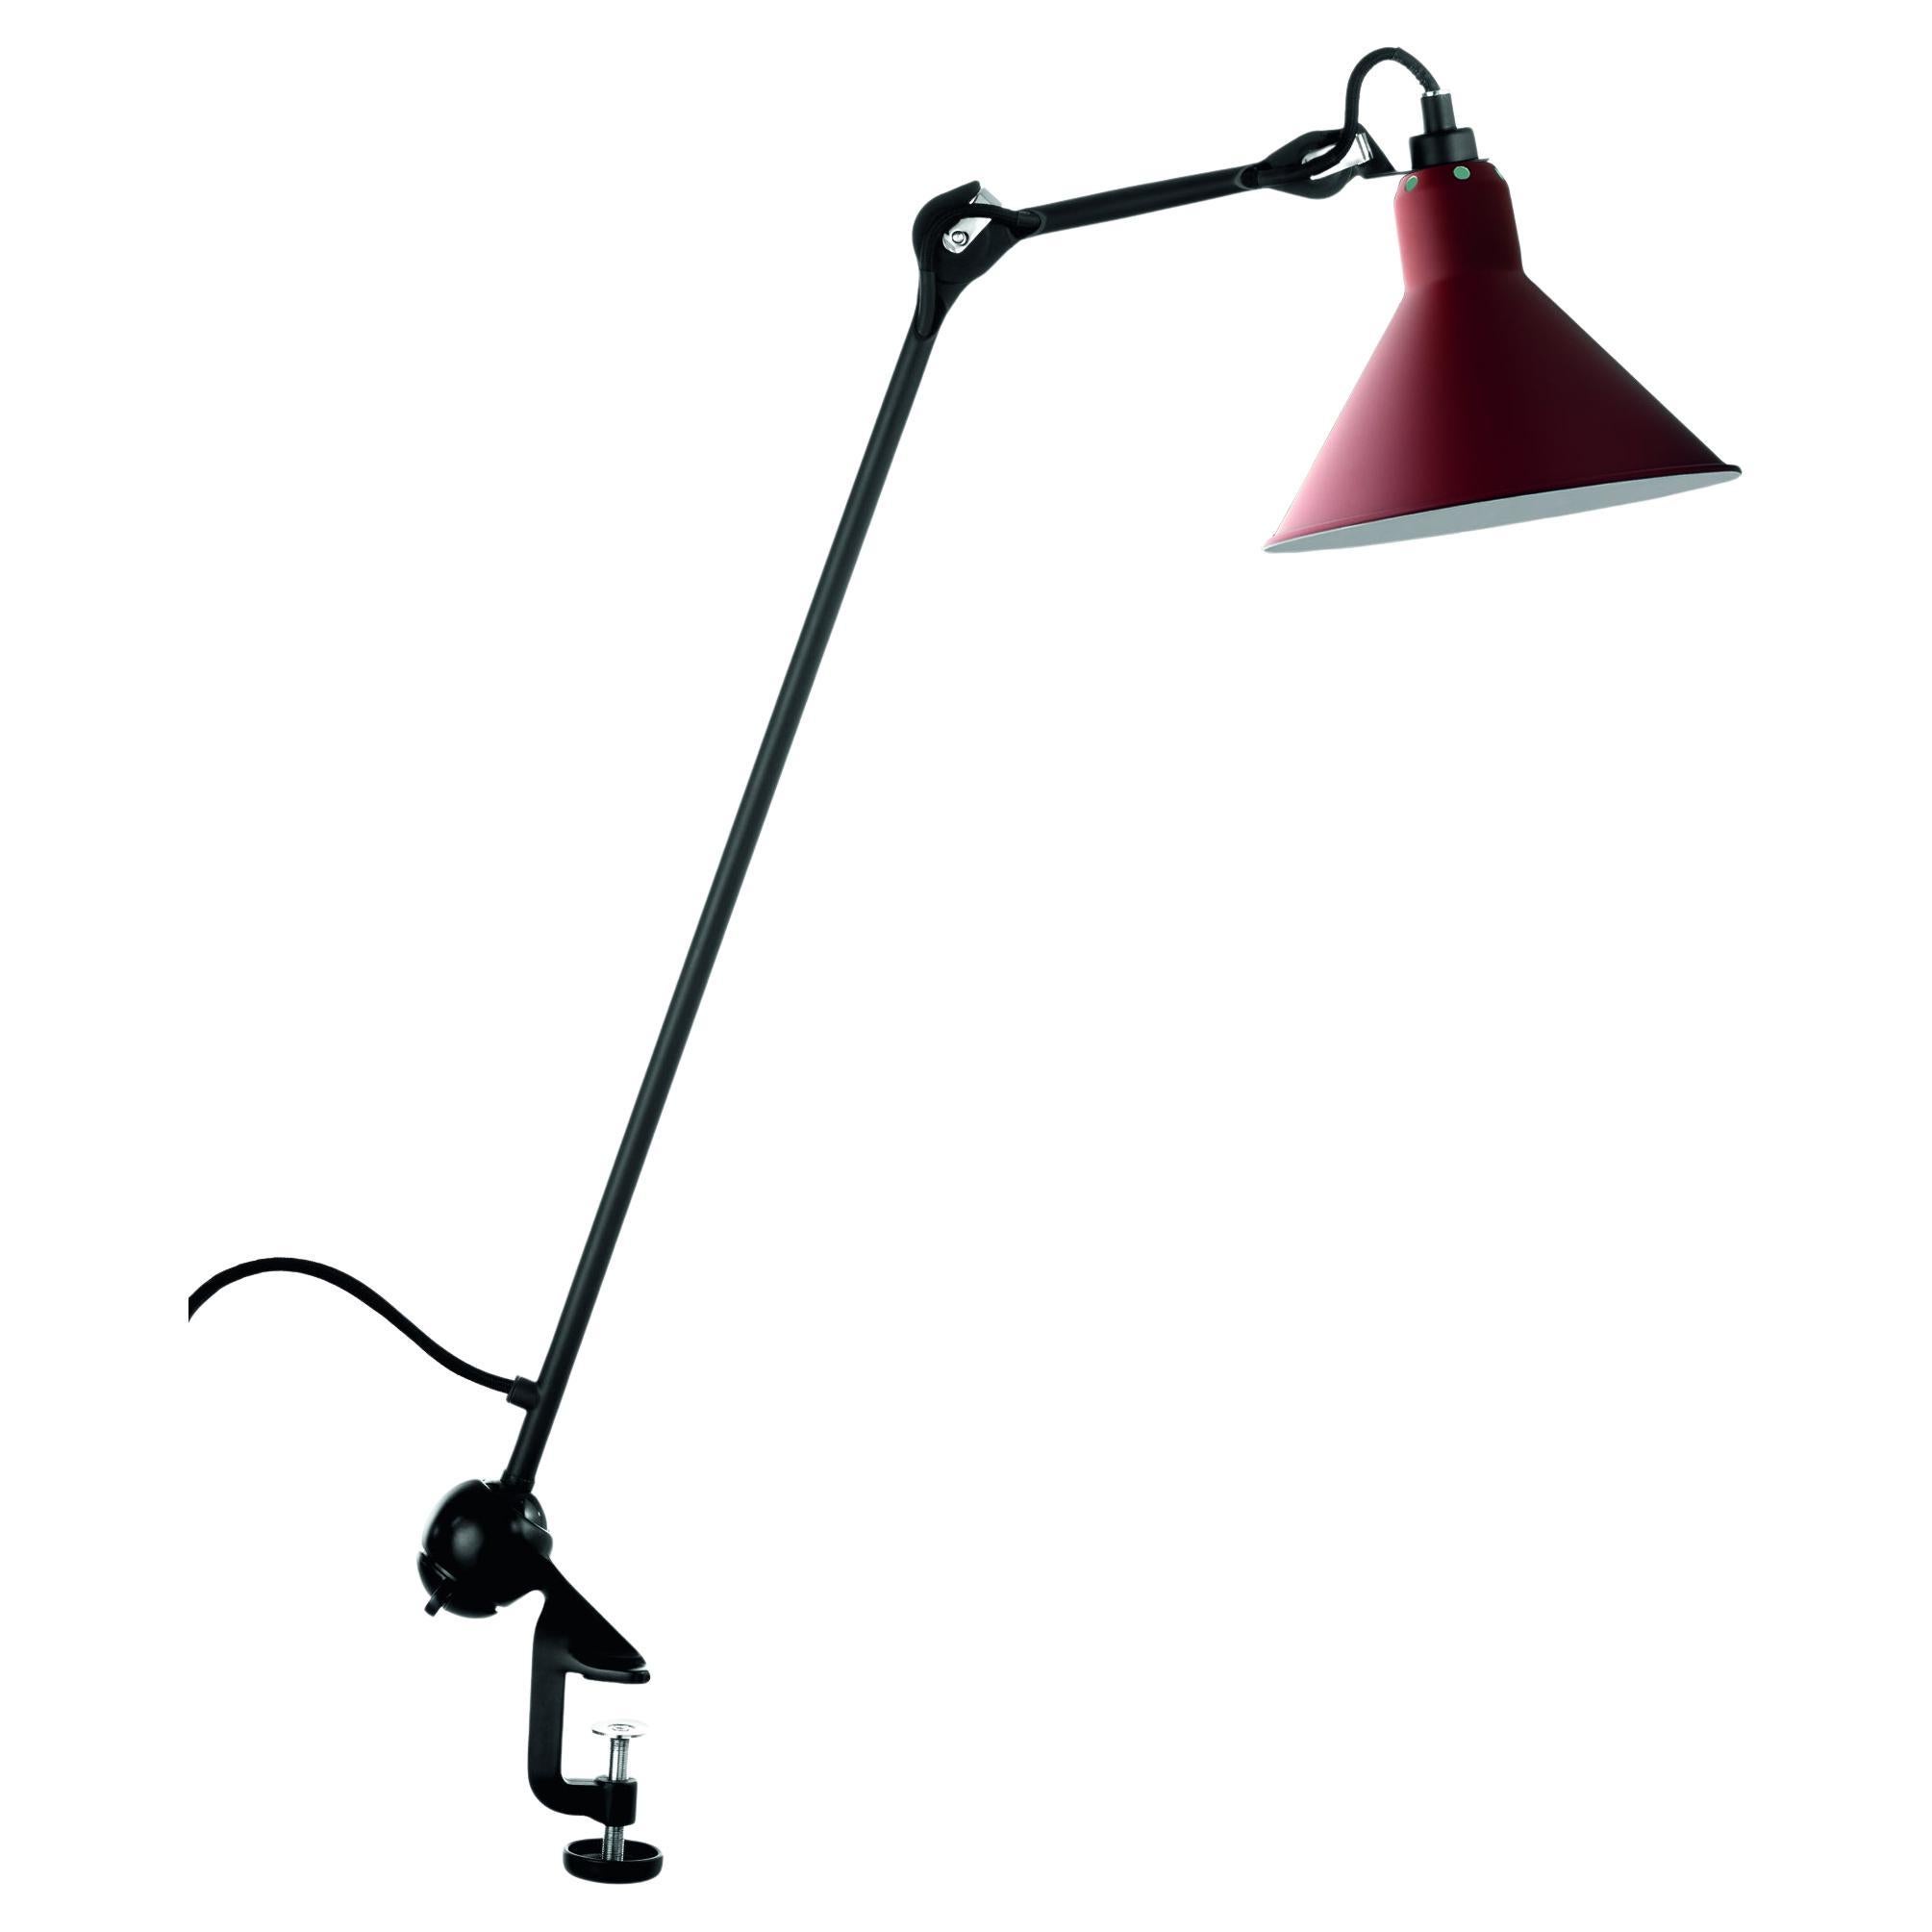 DCW Editions La Lampe Gras N°201 Conic Table Lamp in Black Arm and Red Shade